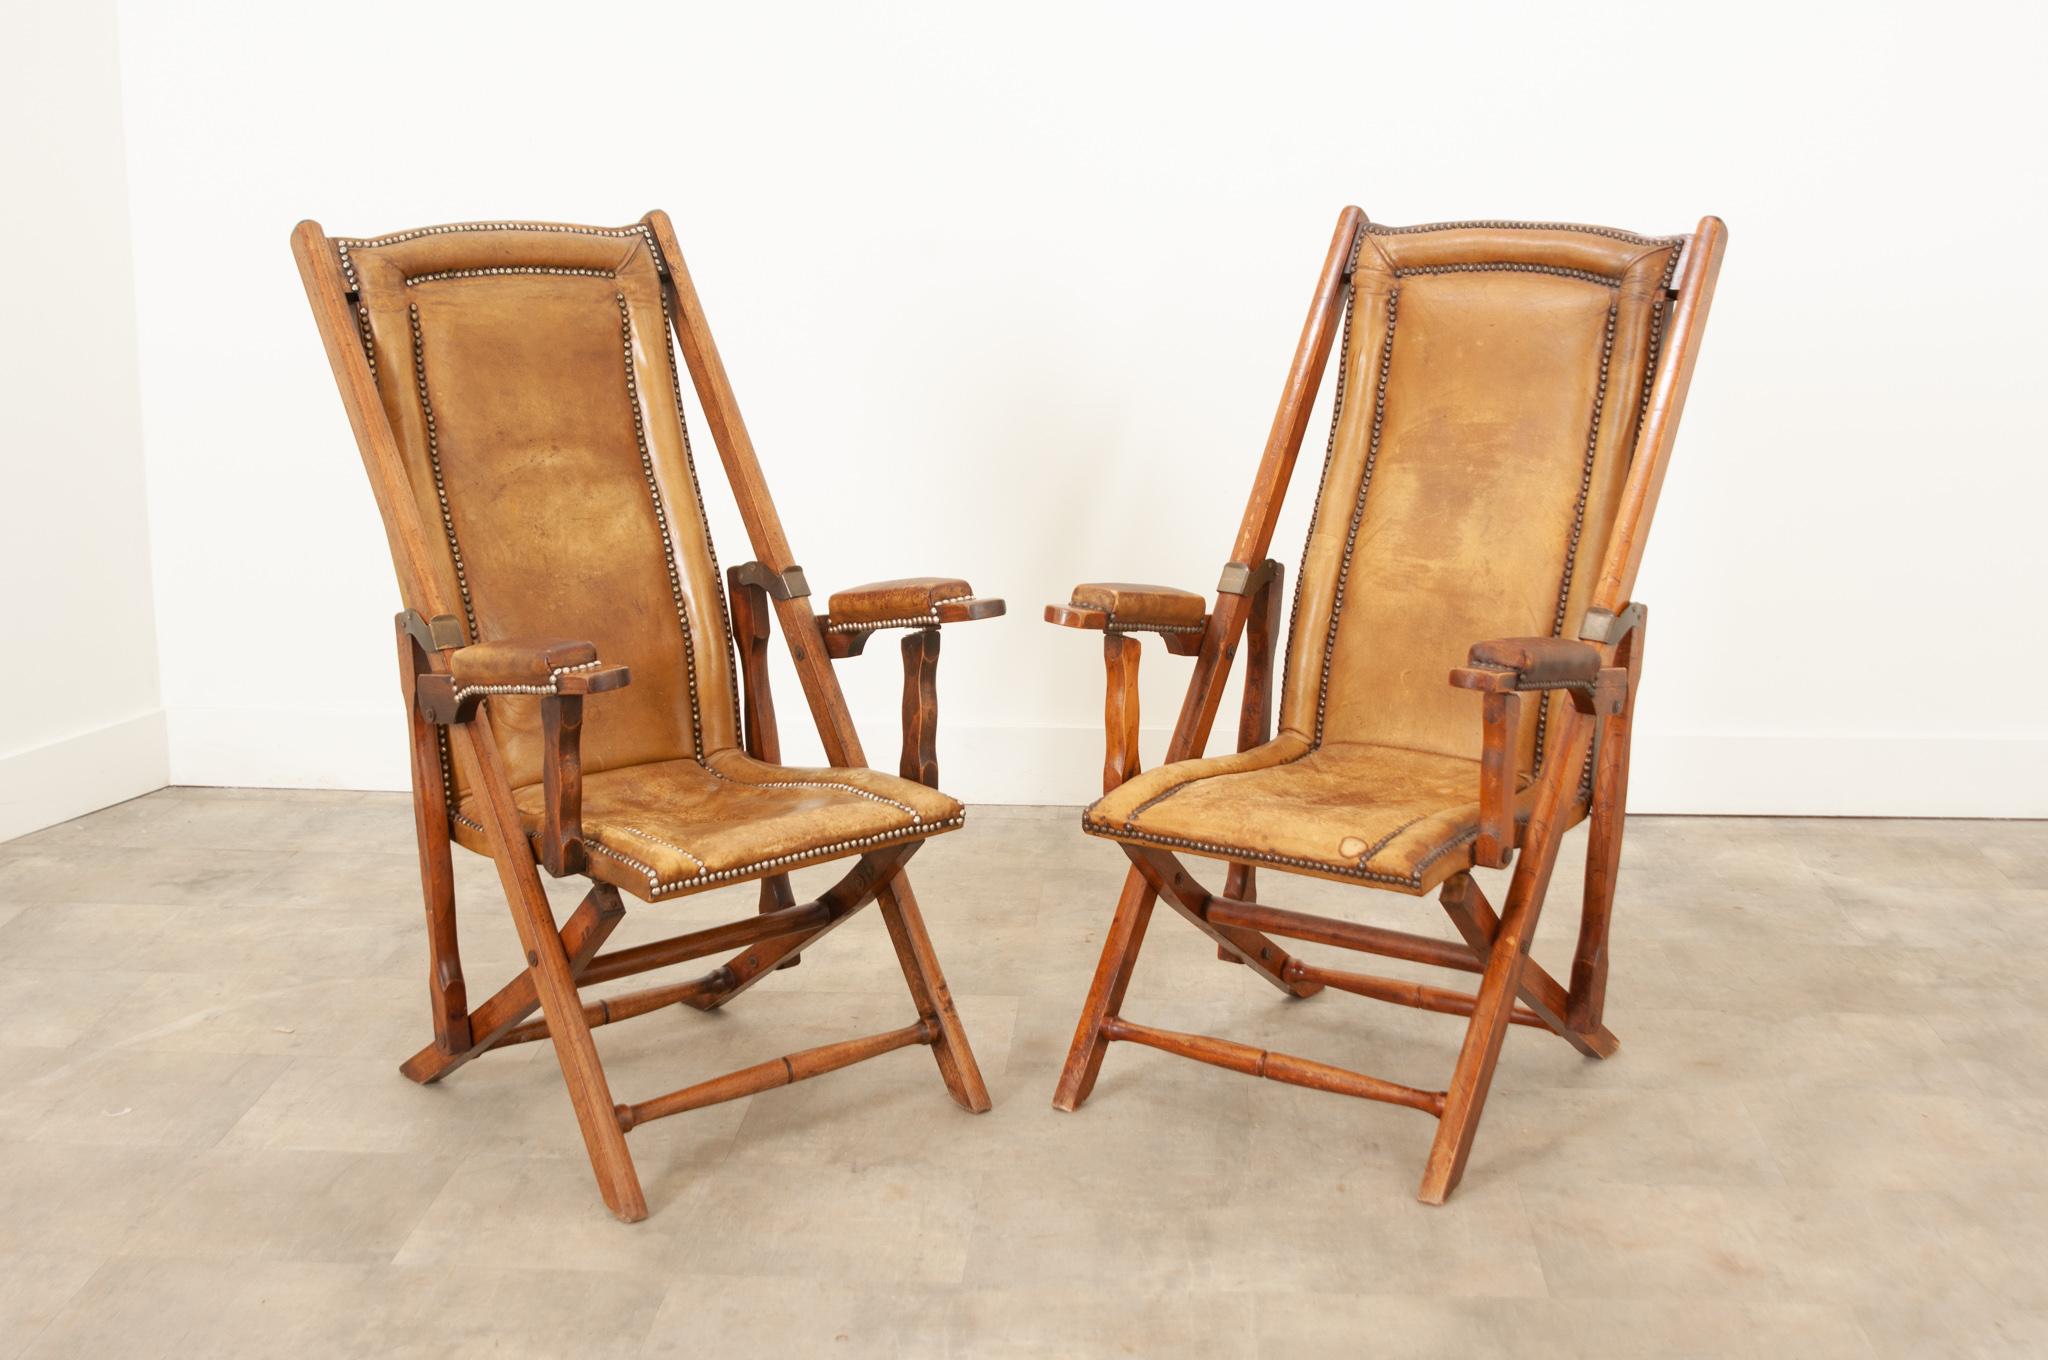 An exceptional and rare pair of French campaign chairs hand-crafted in France circa 1900. A stunning set of military campaign folding chairs with original worn leather and nailhead trim with padded back rest, seats, and arm rests within expertly